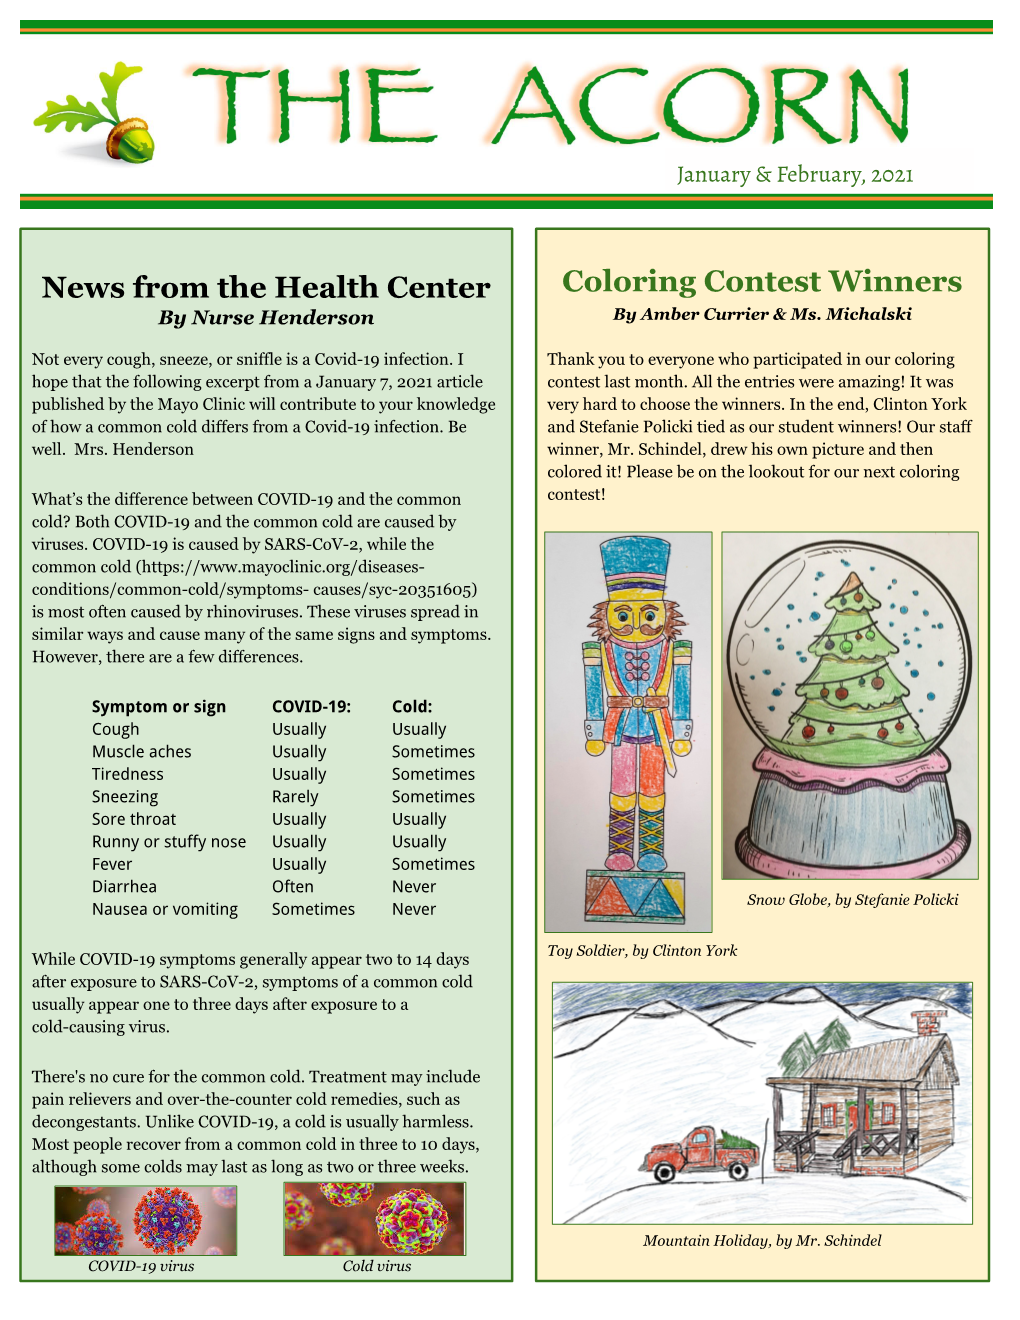 News from the Health Center Coloring Contest Winners by Nurse Henderson by Amber Currier & Ms